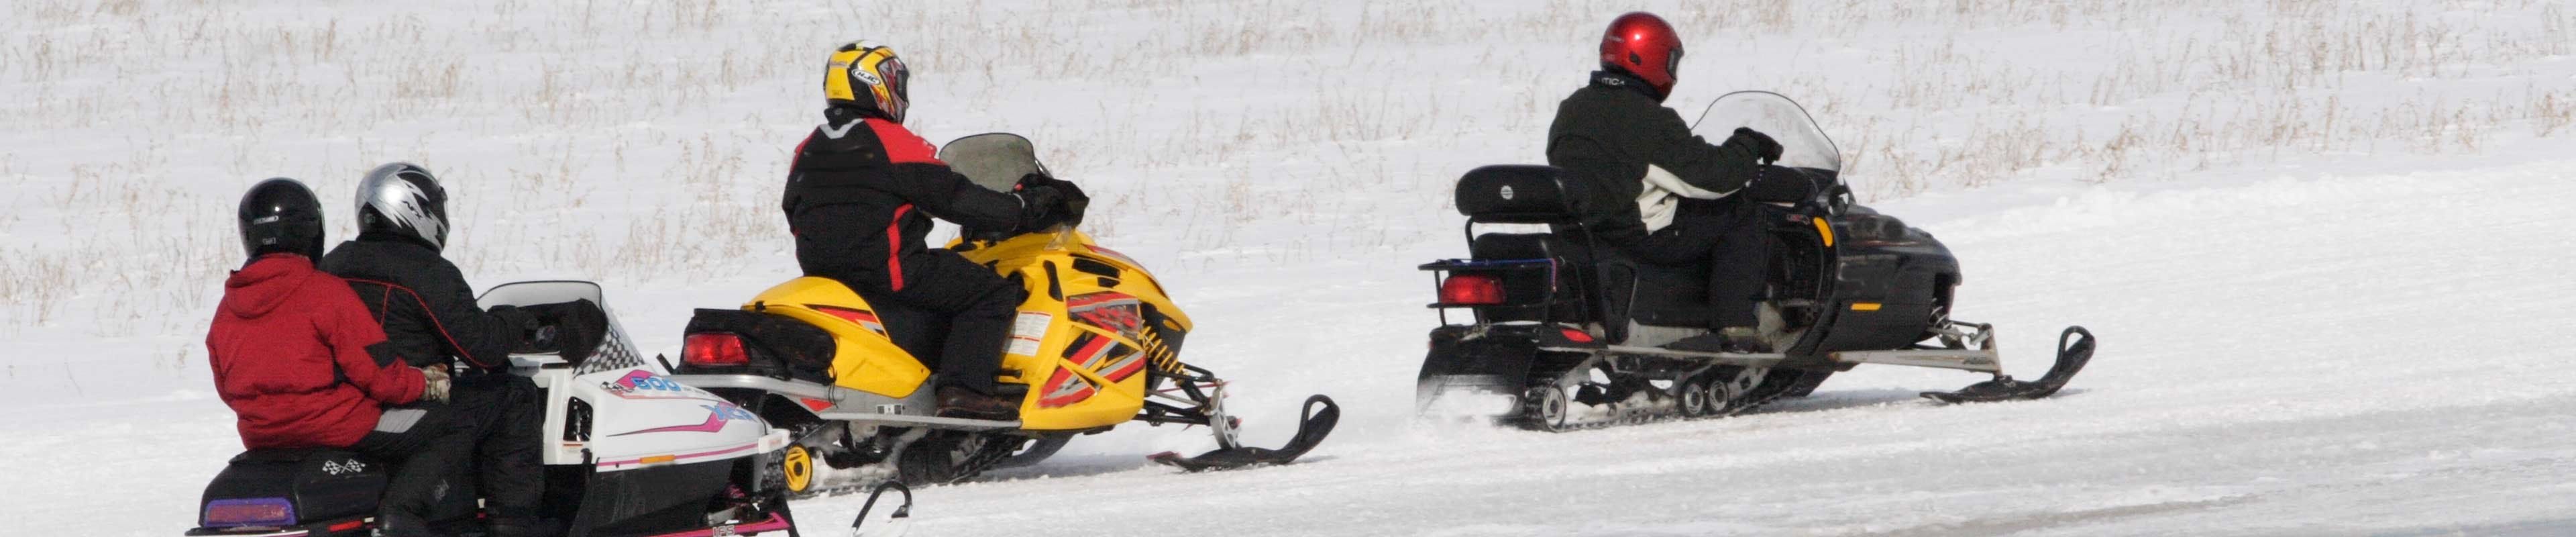 Snowmobilers riding down a snowmobile trail after a winter storm.